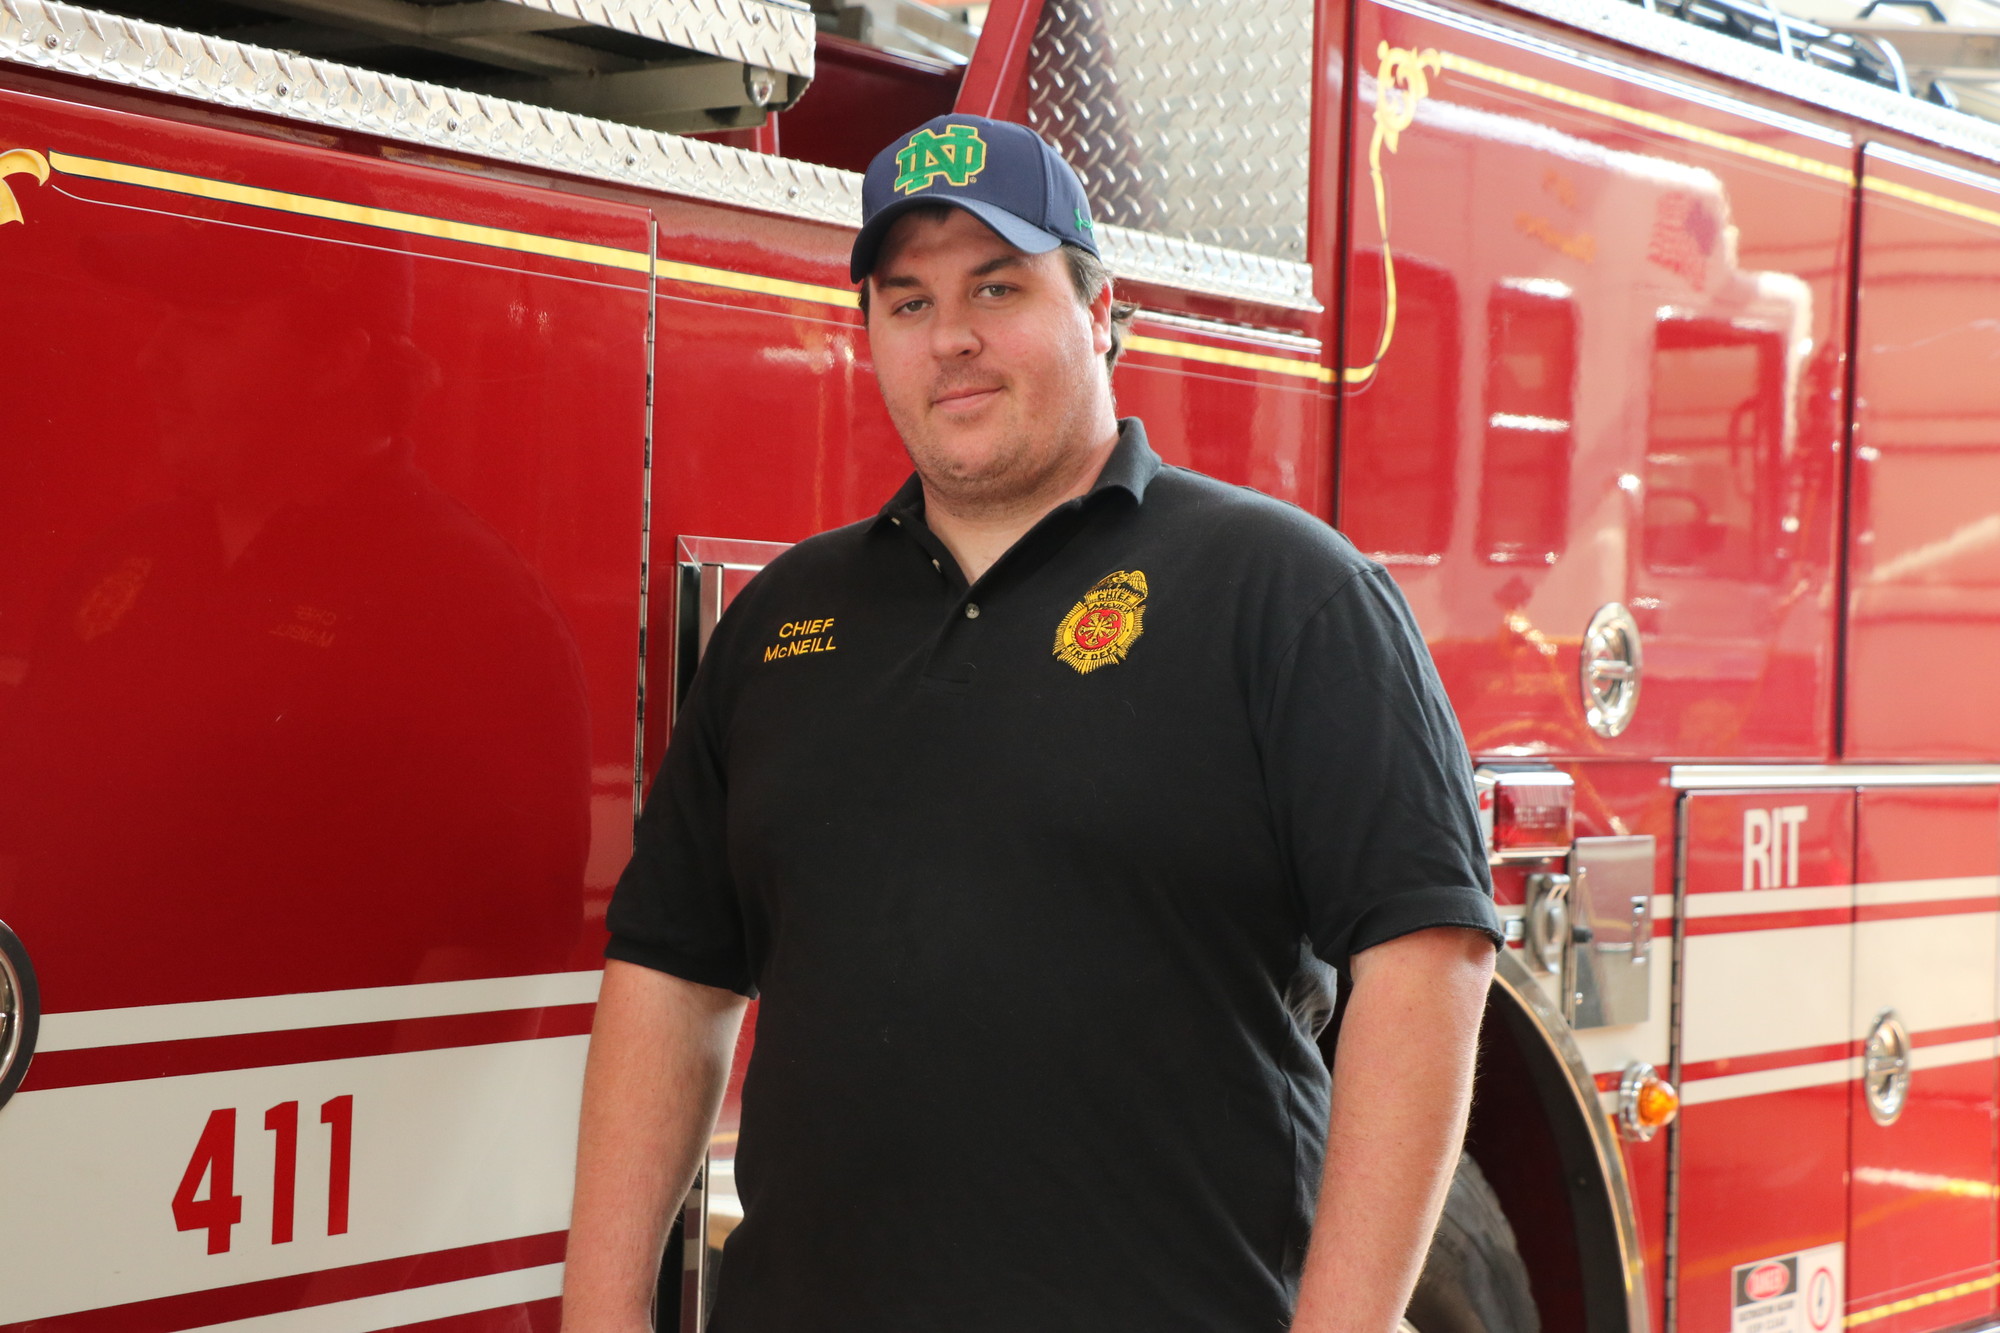 Patrick McNeill, Lakeview’s new fire chief, has been a volunteer with the department for eight years.